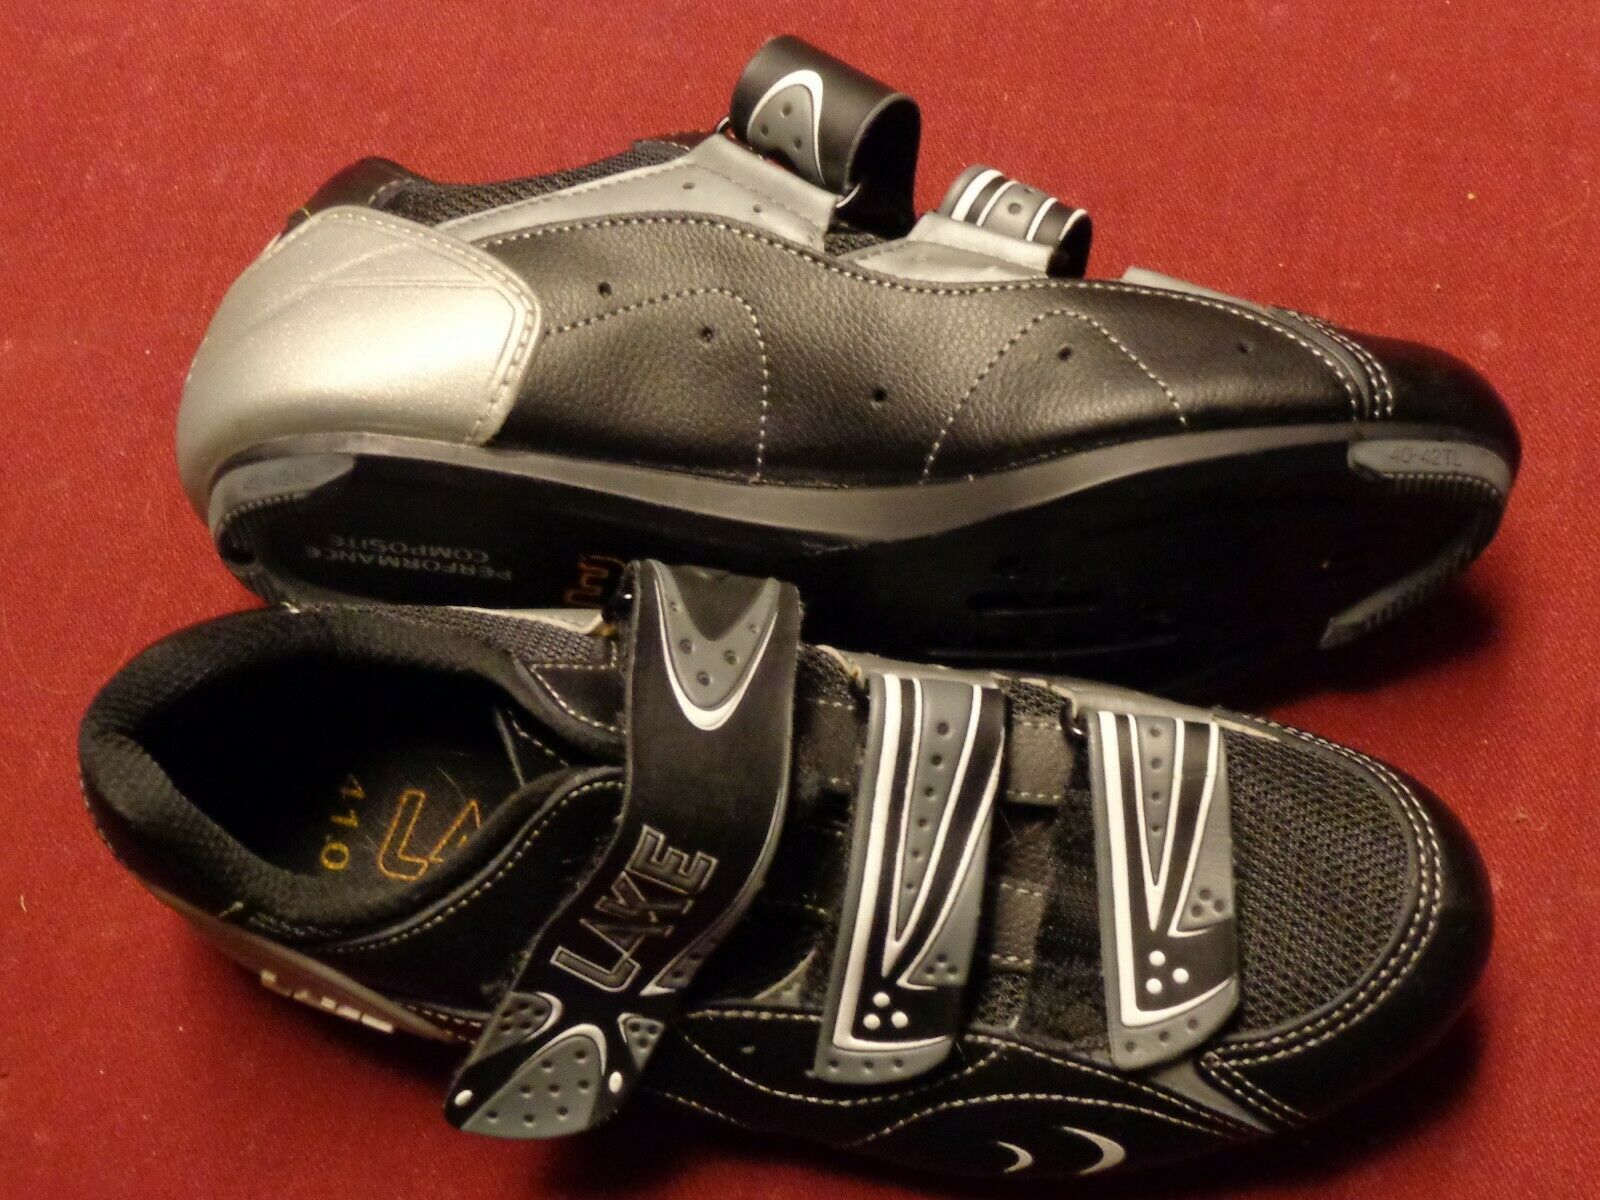 Cycling Shoes. Size 7.5 Usa 41 Eur.  Lake Brand Used Condition. Black & Silver